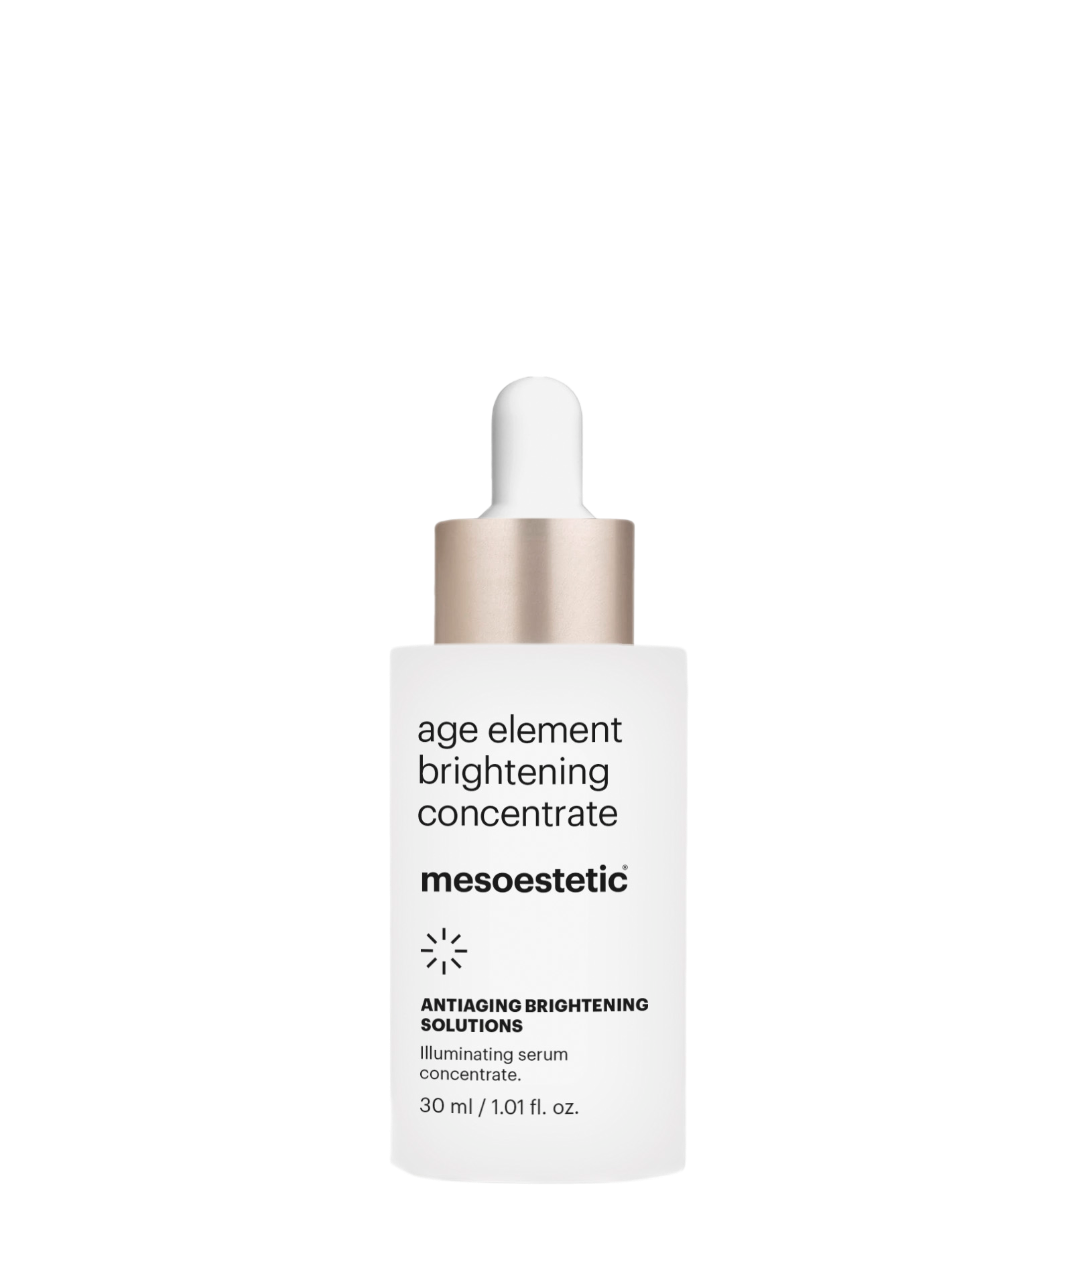 1) Brightening concentrate_Product